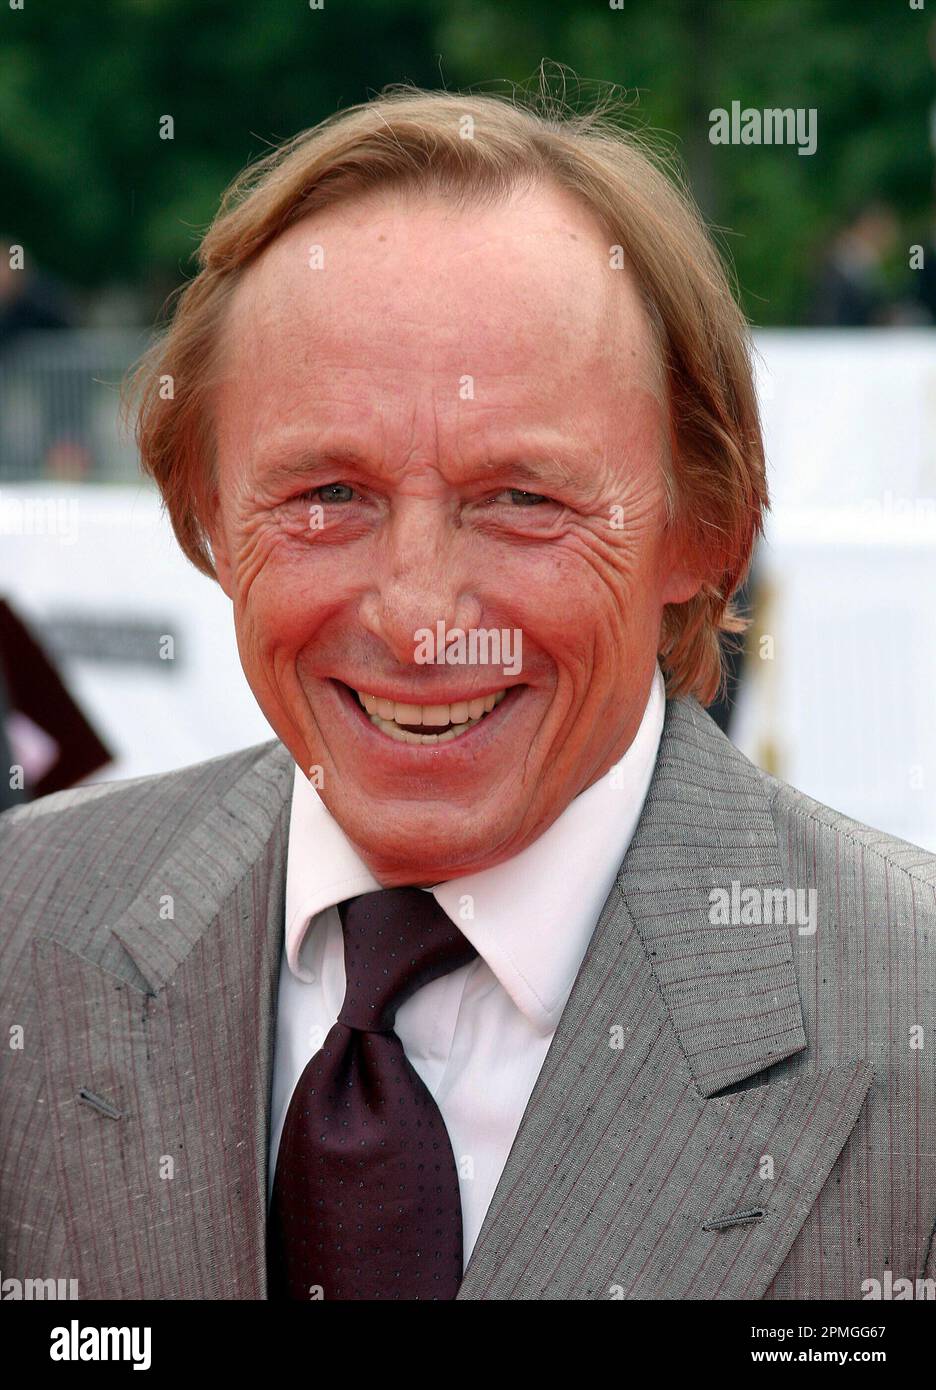 ARCHIVE PHOTO: Claus-Theo GAERTNER celebrates his 80th birthday on April 19, 2023, Claus-Theo GAERTNER, Germany, actor, portrait, portrait, upright format, at the presentation of the German Film Prize in Berlin, July 8th, 2005. ? Stock Photo